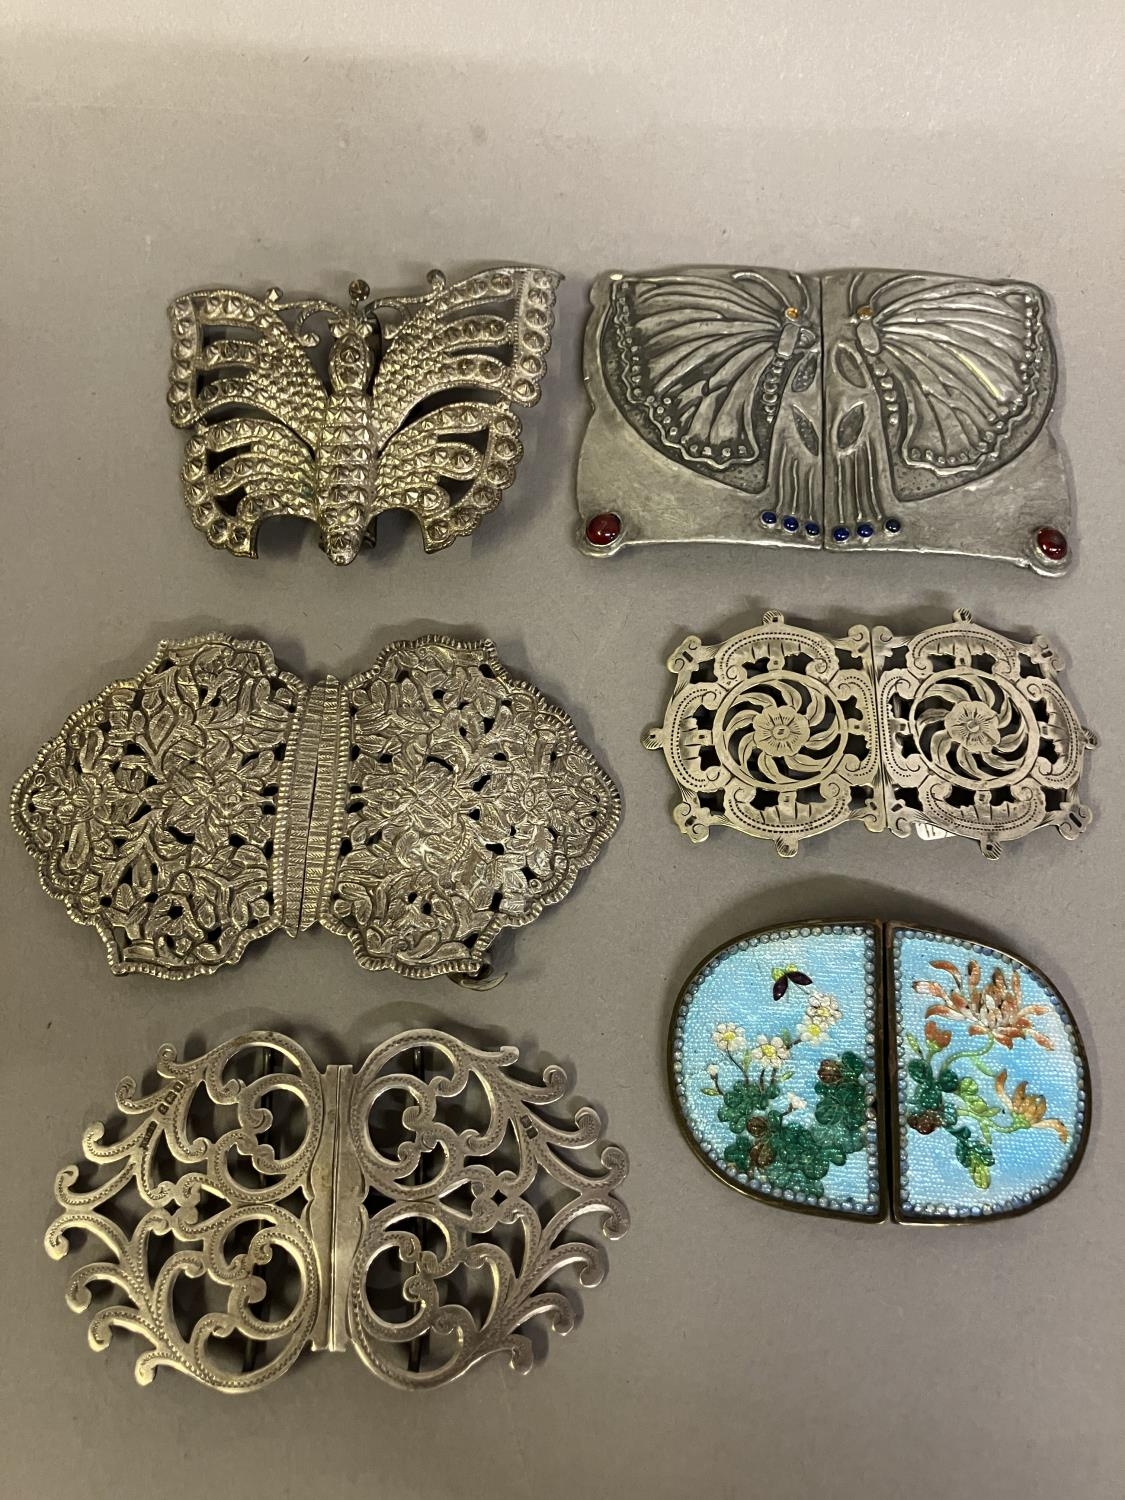 Unusual metal buckles, late 19th century/early 20th century, comprising one large buckle, Art